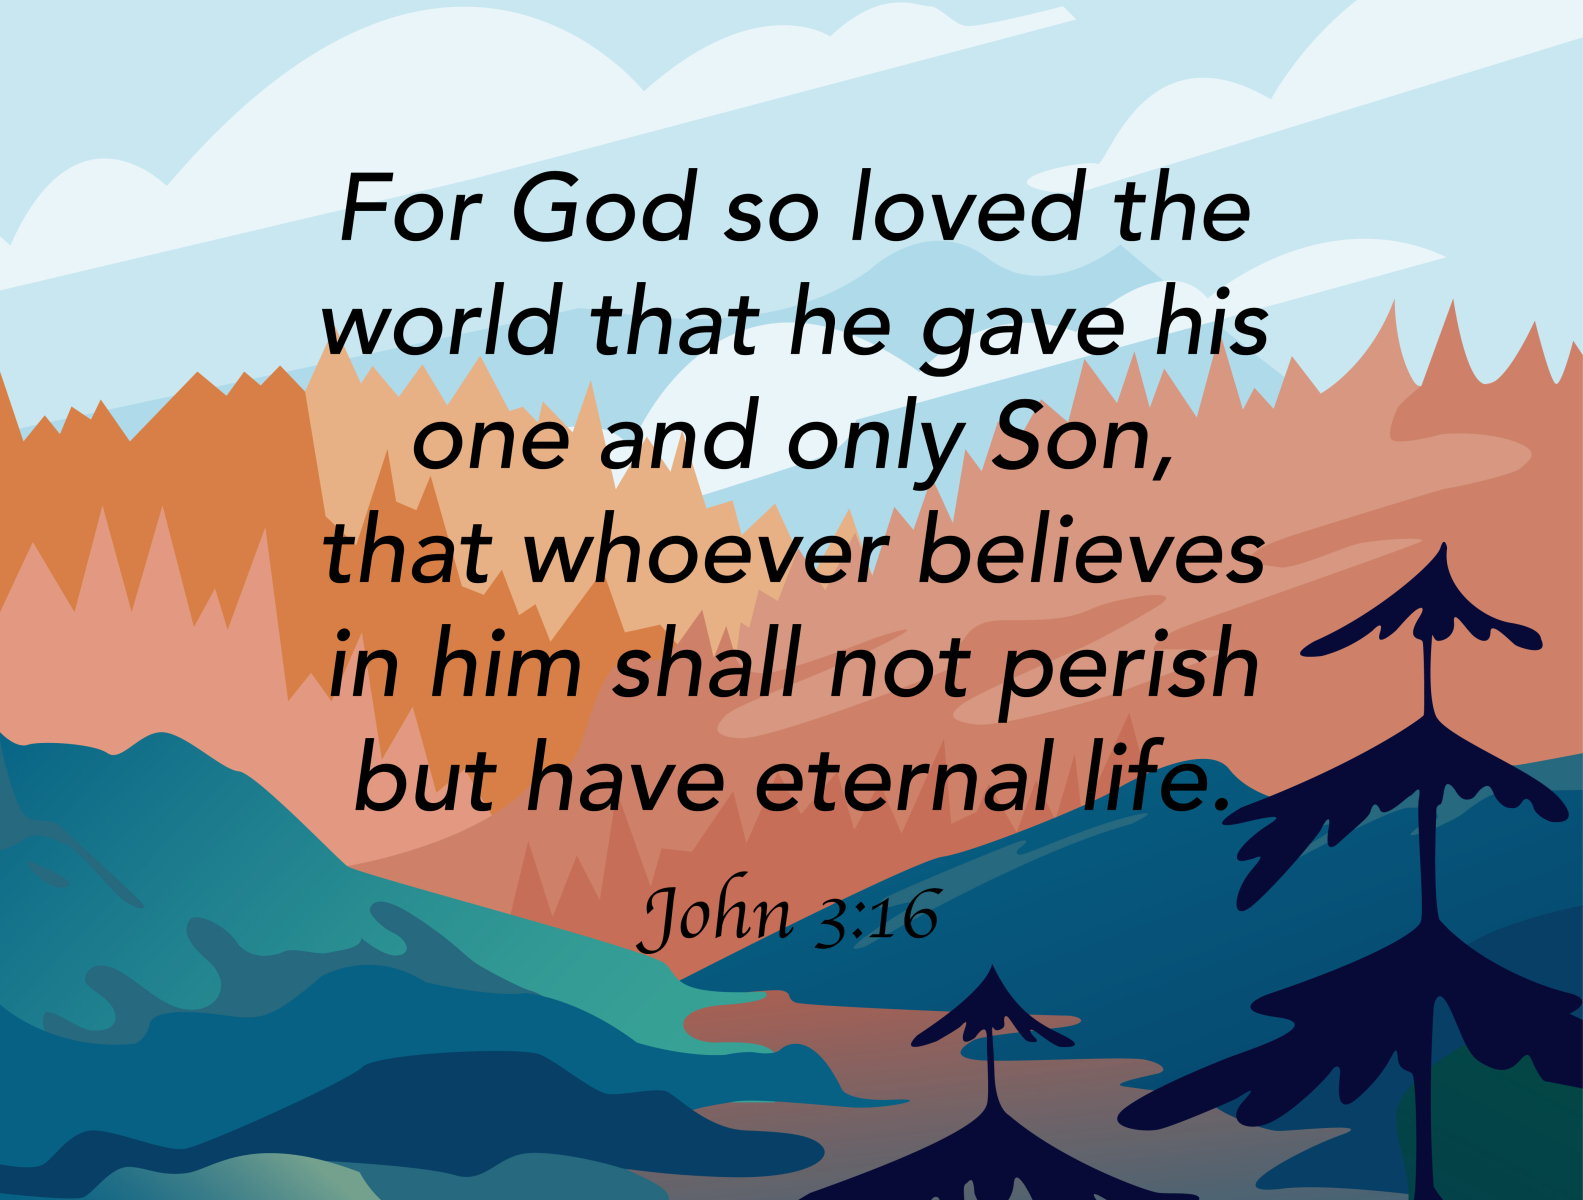 John 3:16 Verse Image by Will on Dribbble